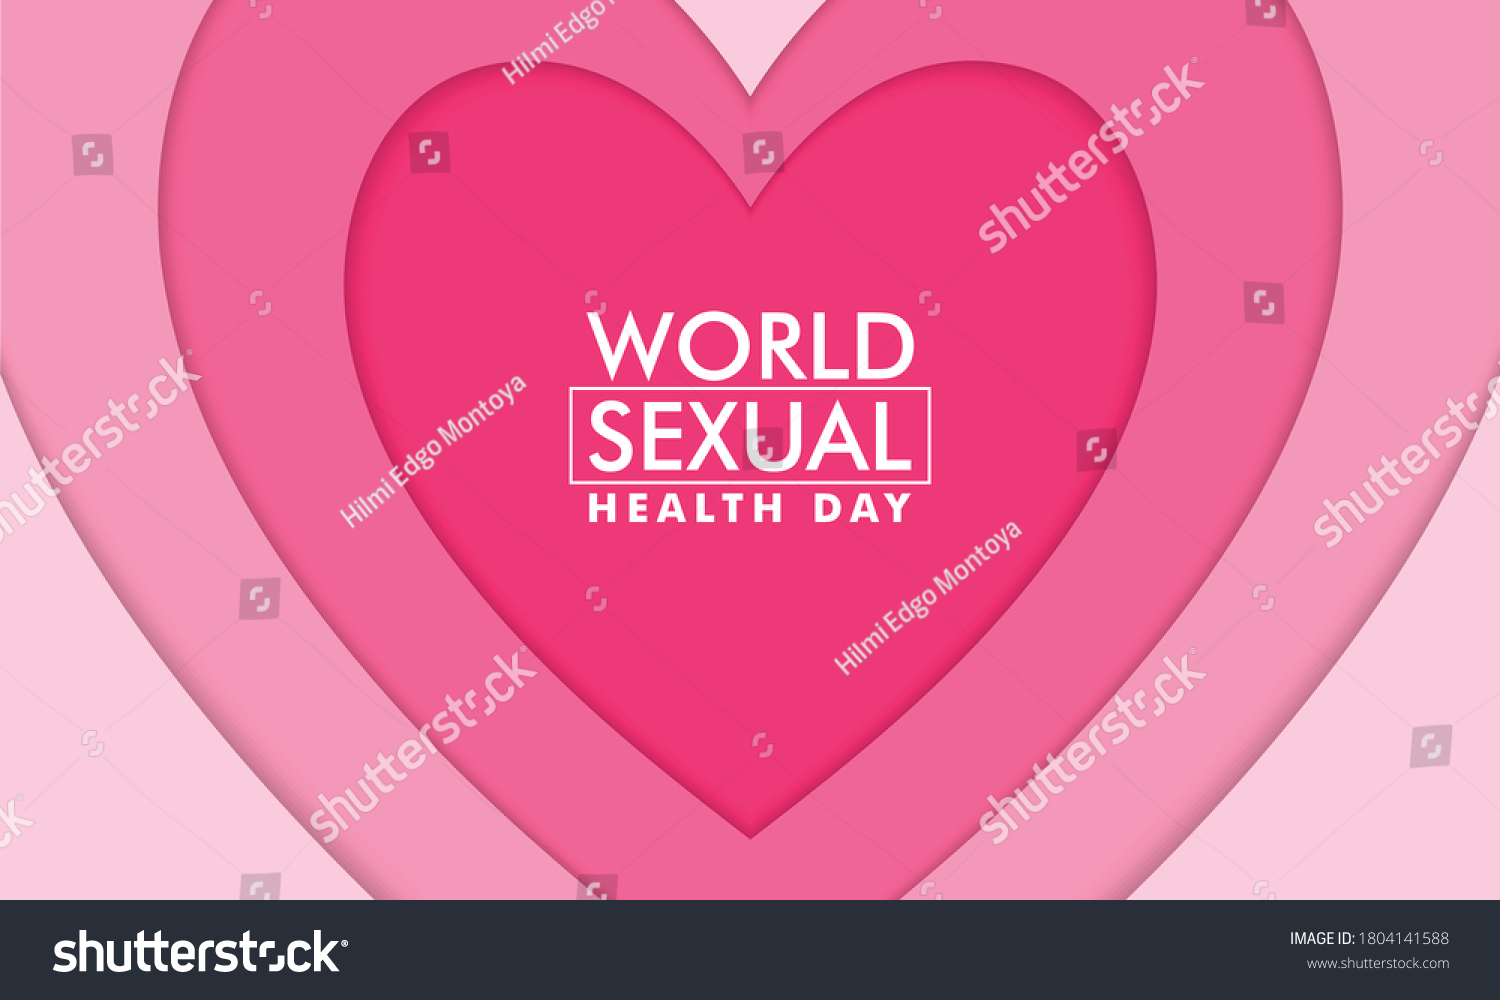 World Sexual Health Day Background Stock Vector Royalty Free 1804141588 Shutterstock 